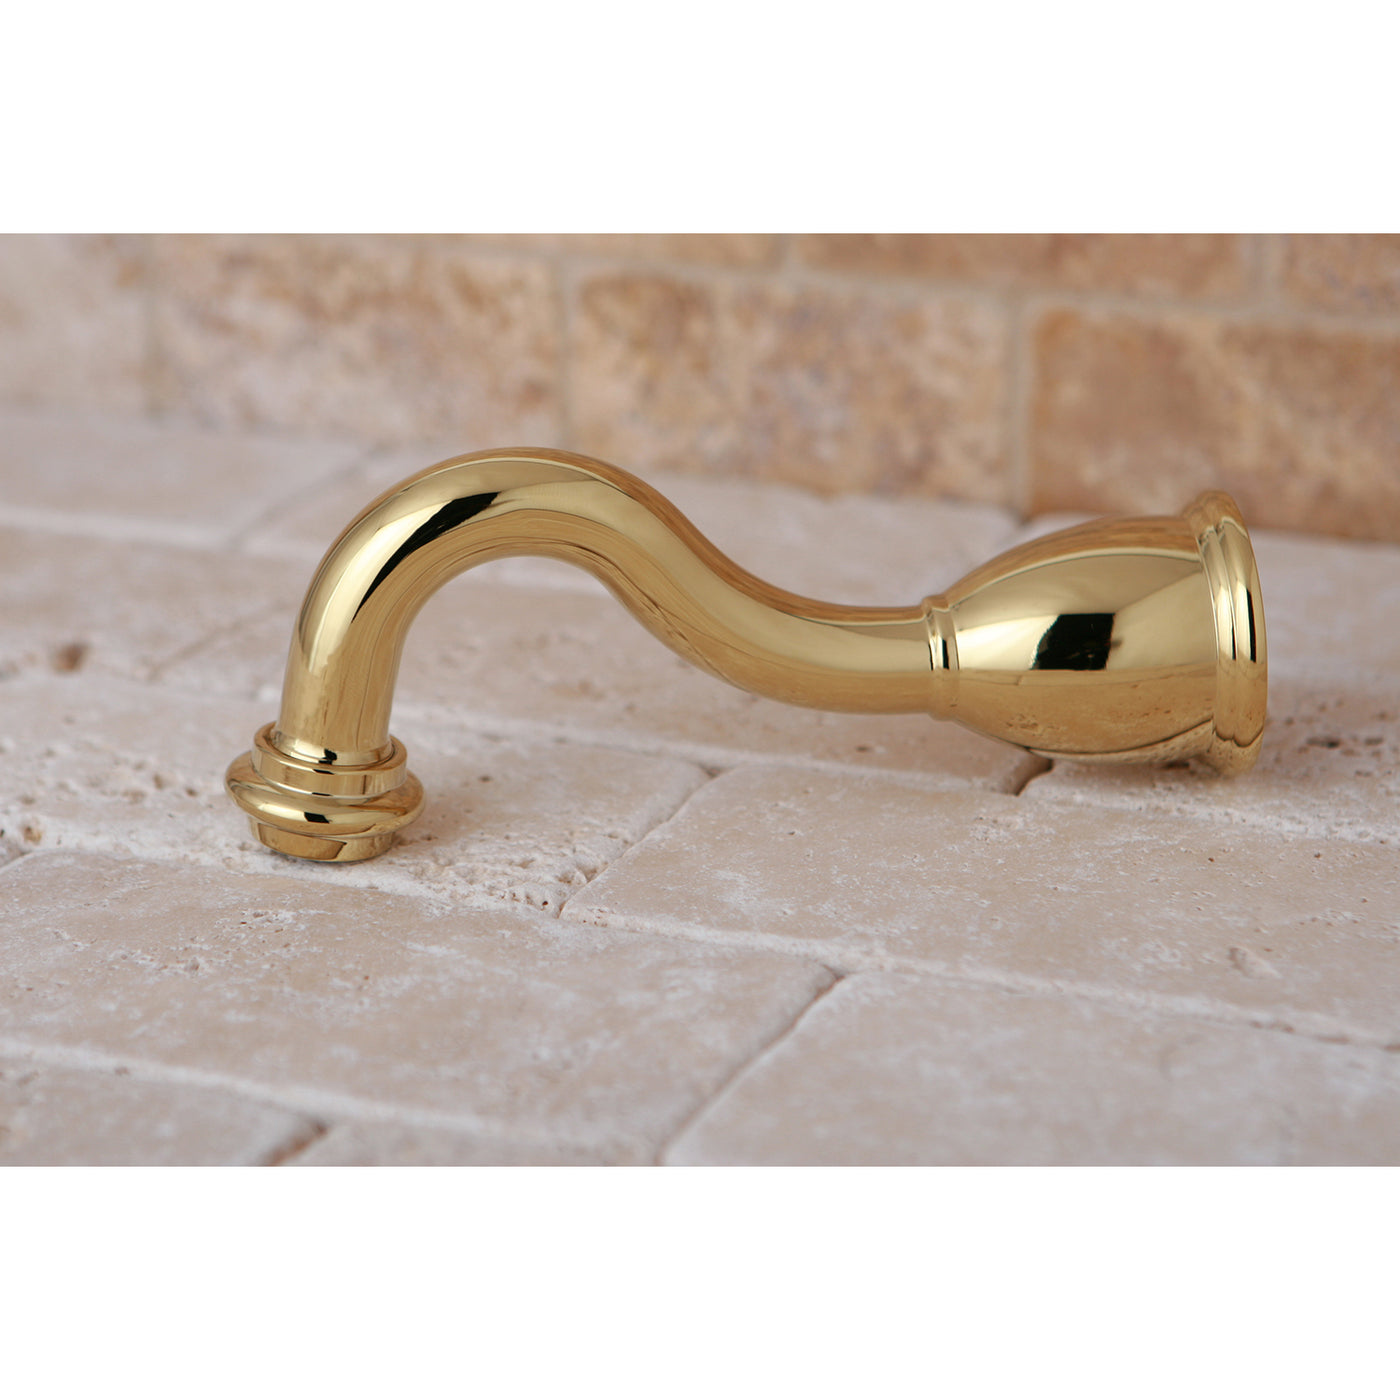 Elements of Design DK1687A2 6-Inch Tub Spout, Polished Brass